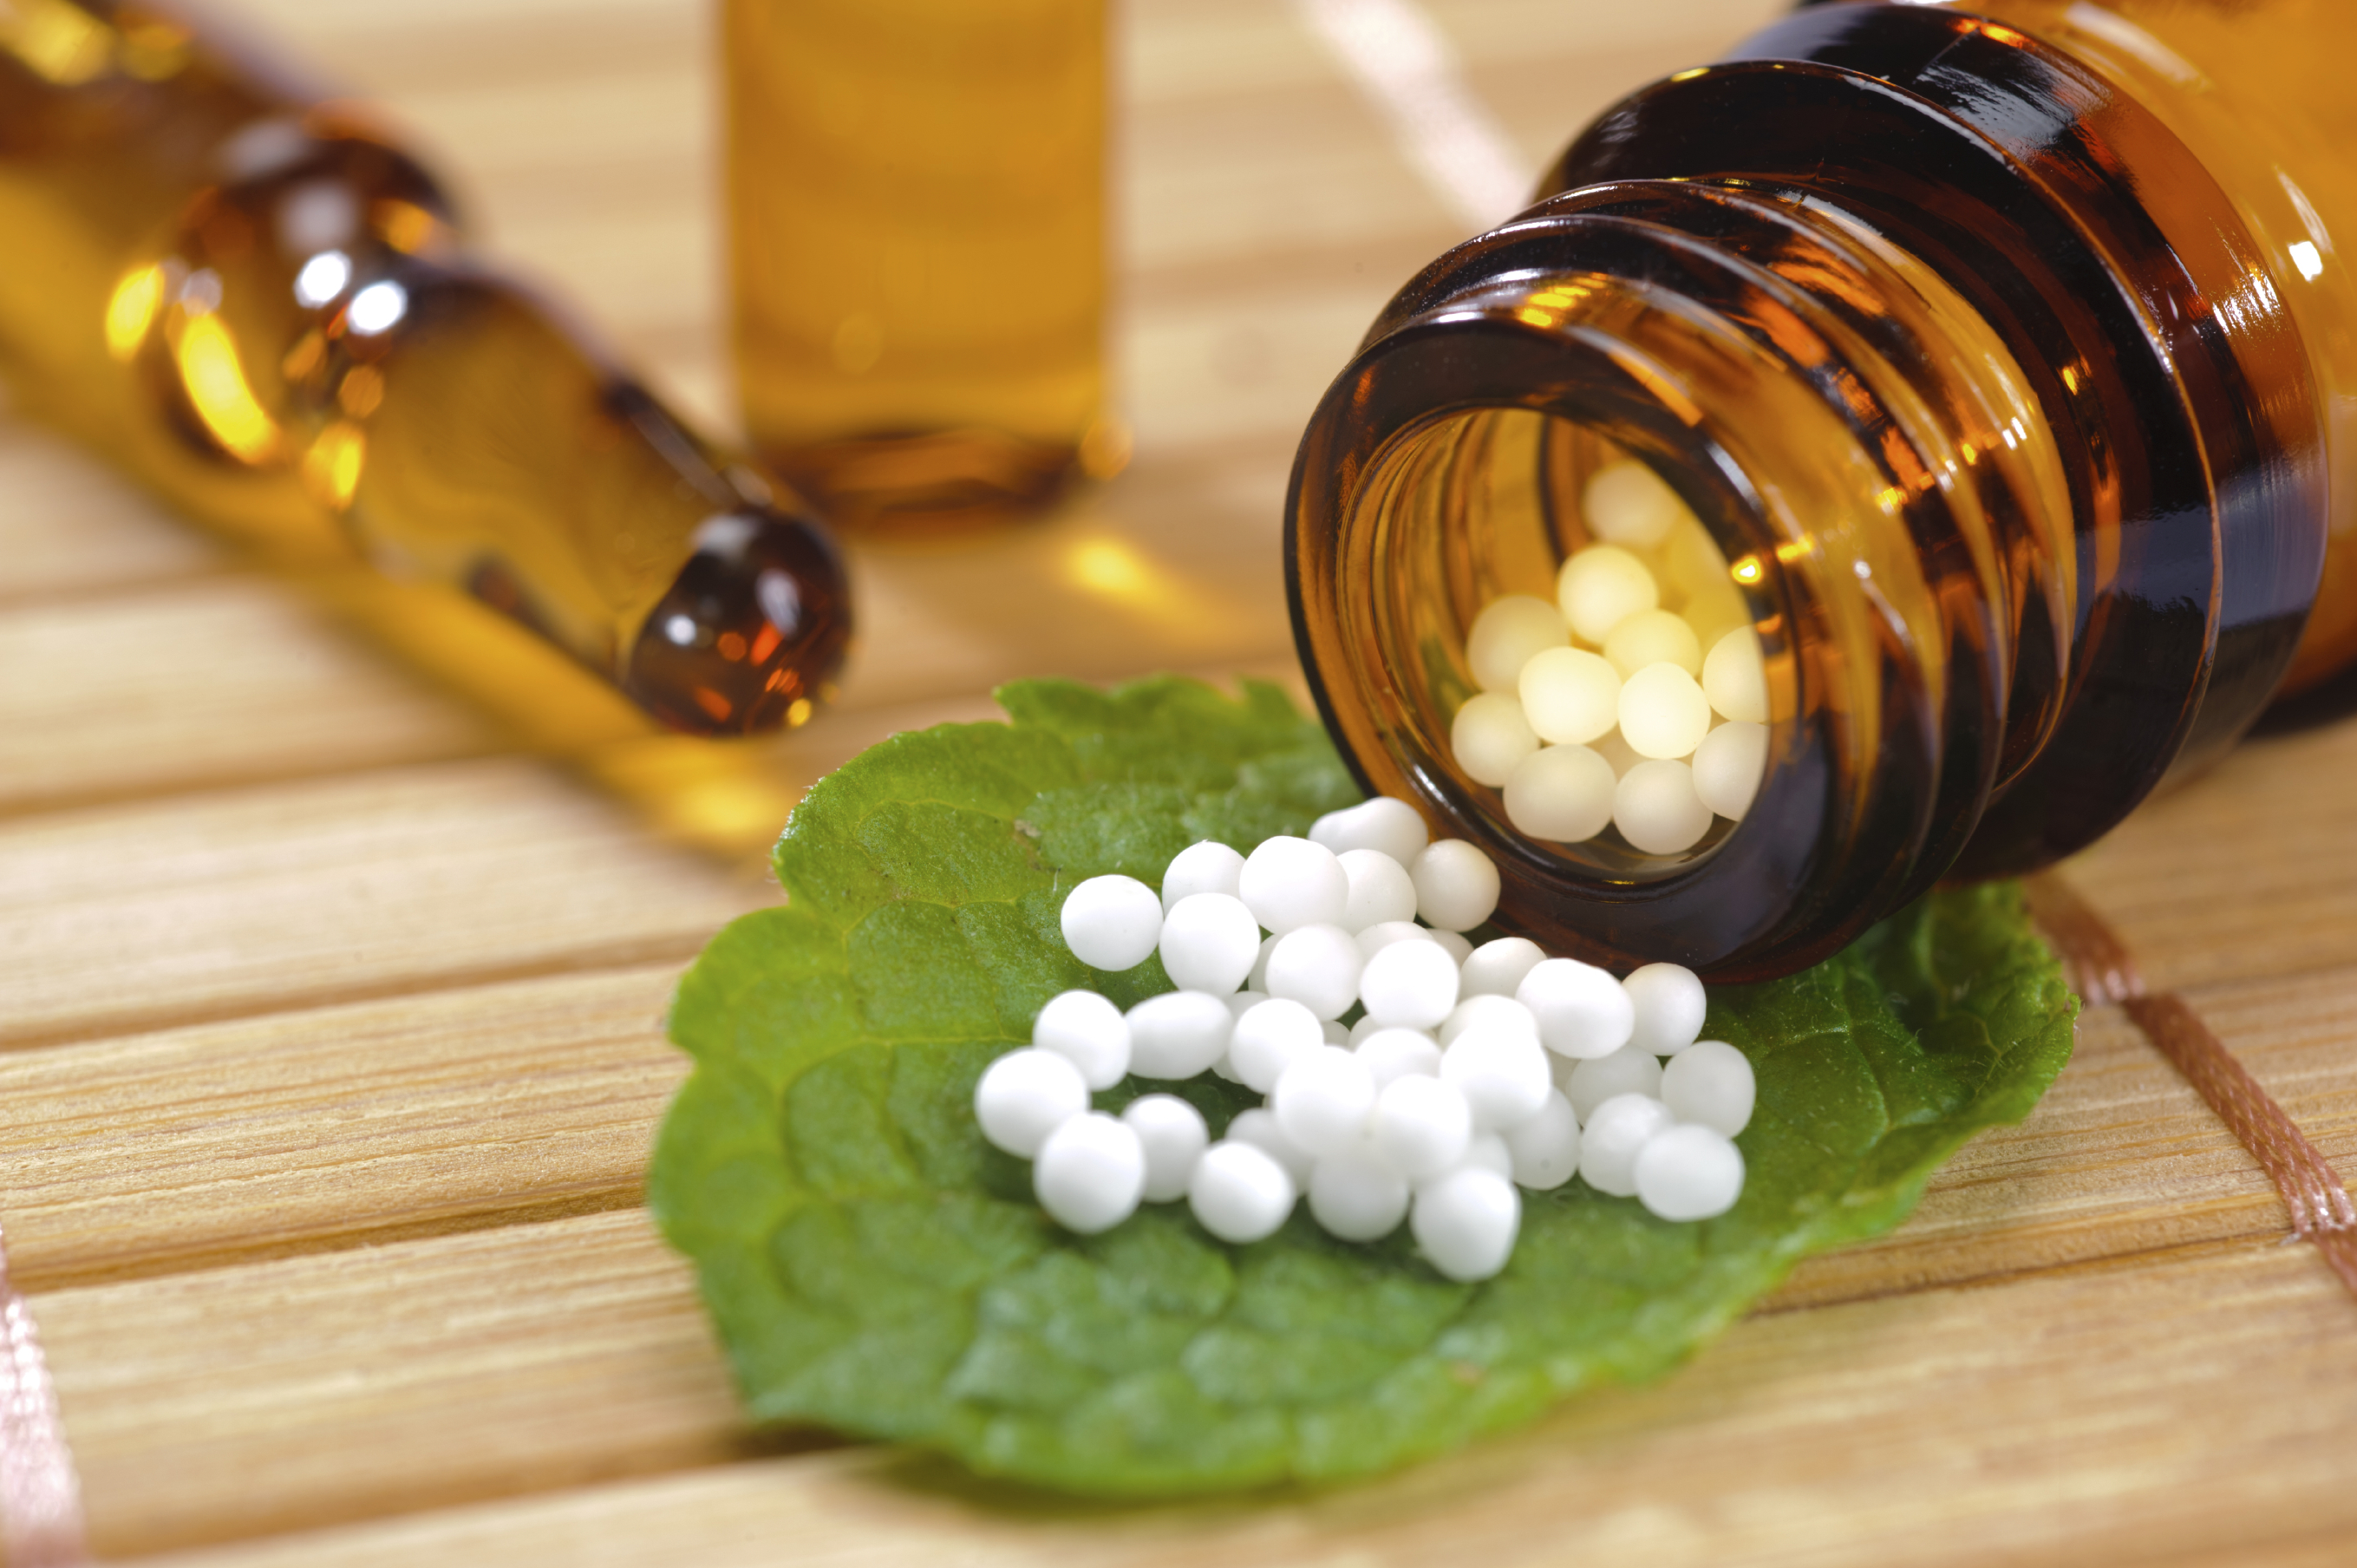 Post Ban: Why Is NHS Still Spending A Fortune On Homeopathy ...